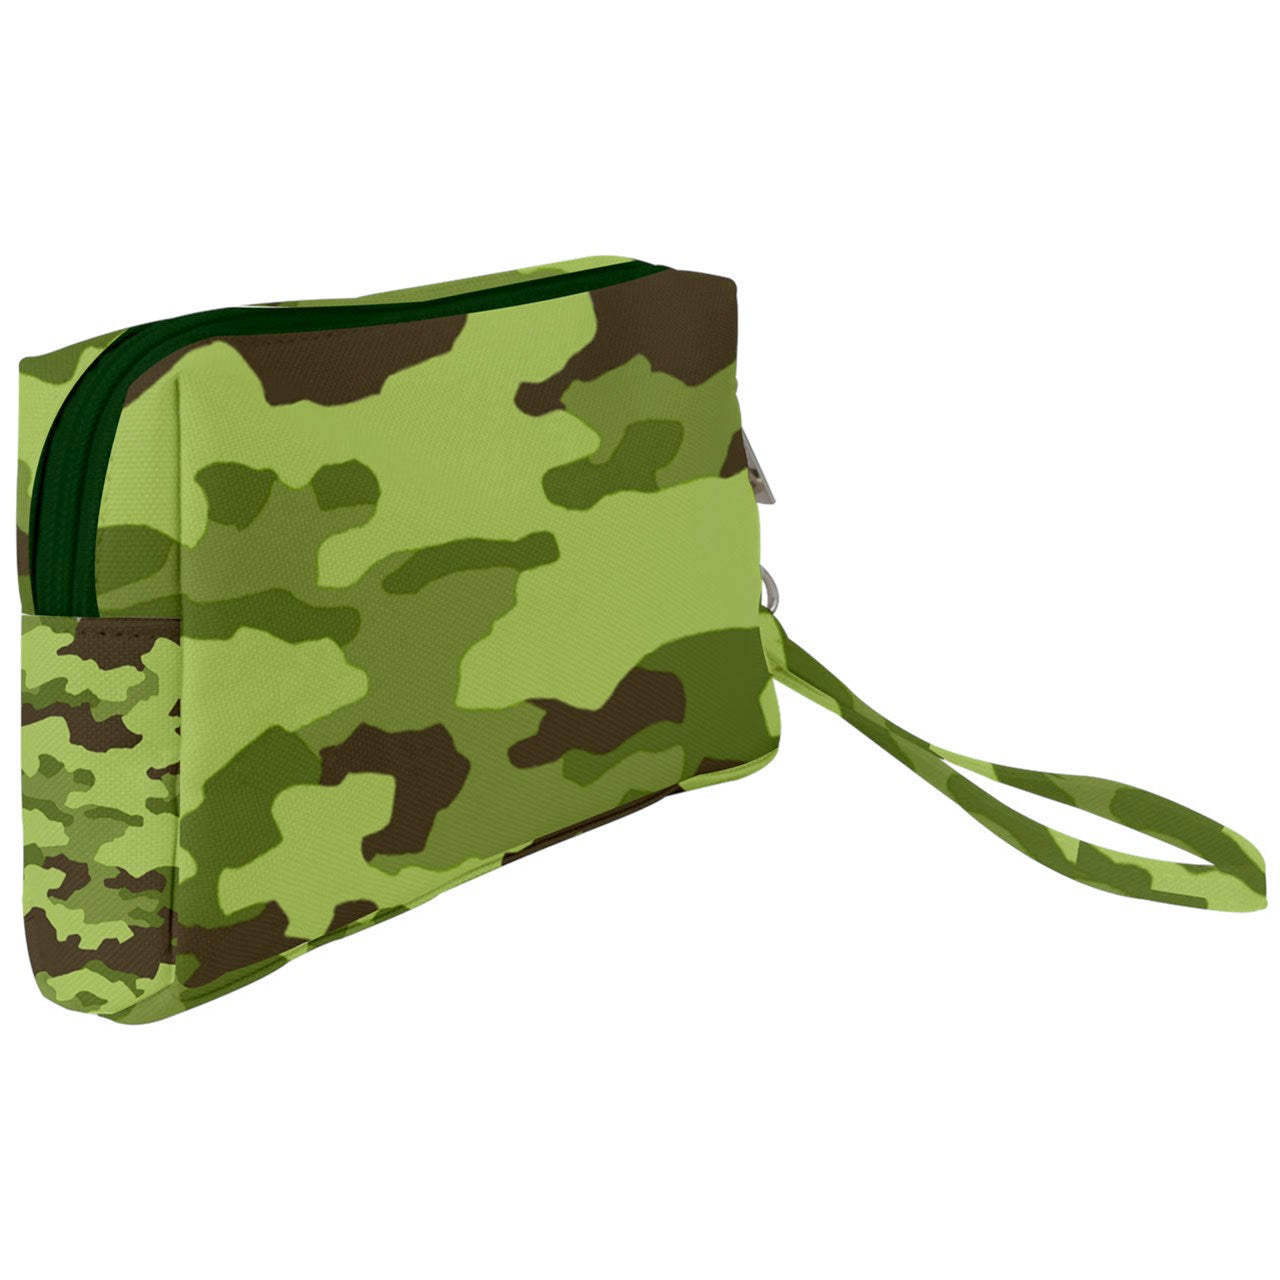 Y2k Soldier Northern Wristlet Pouch Bag (Small)